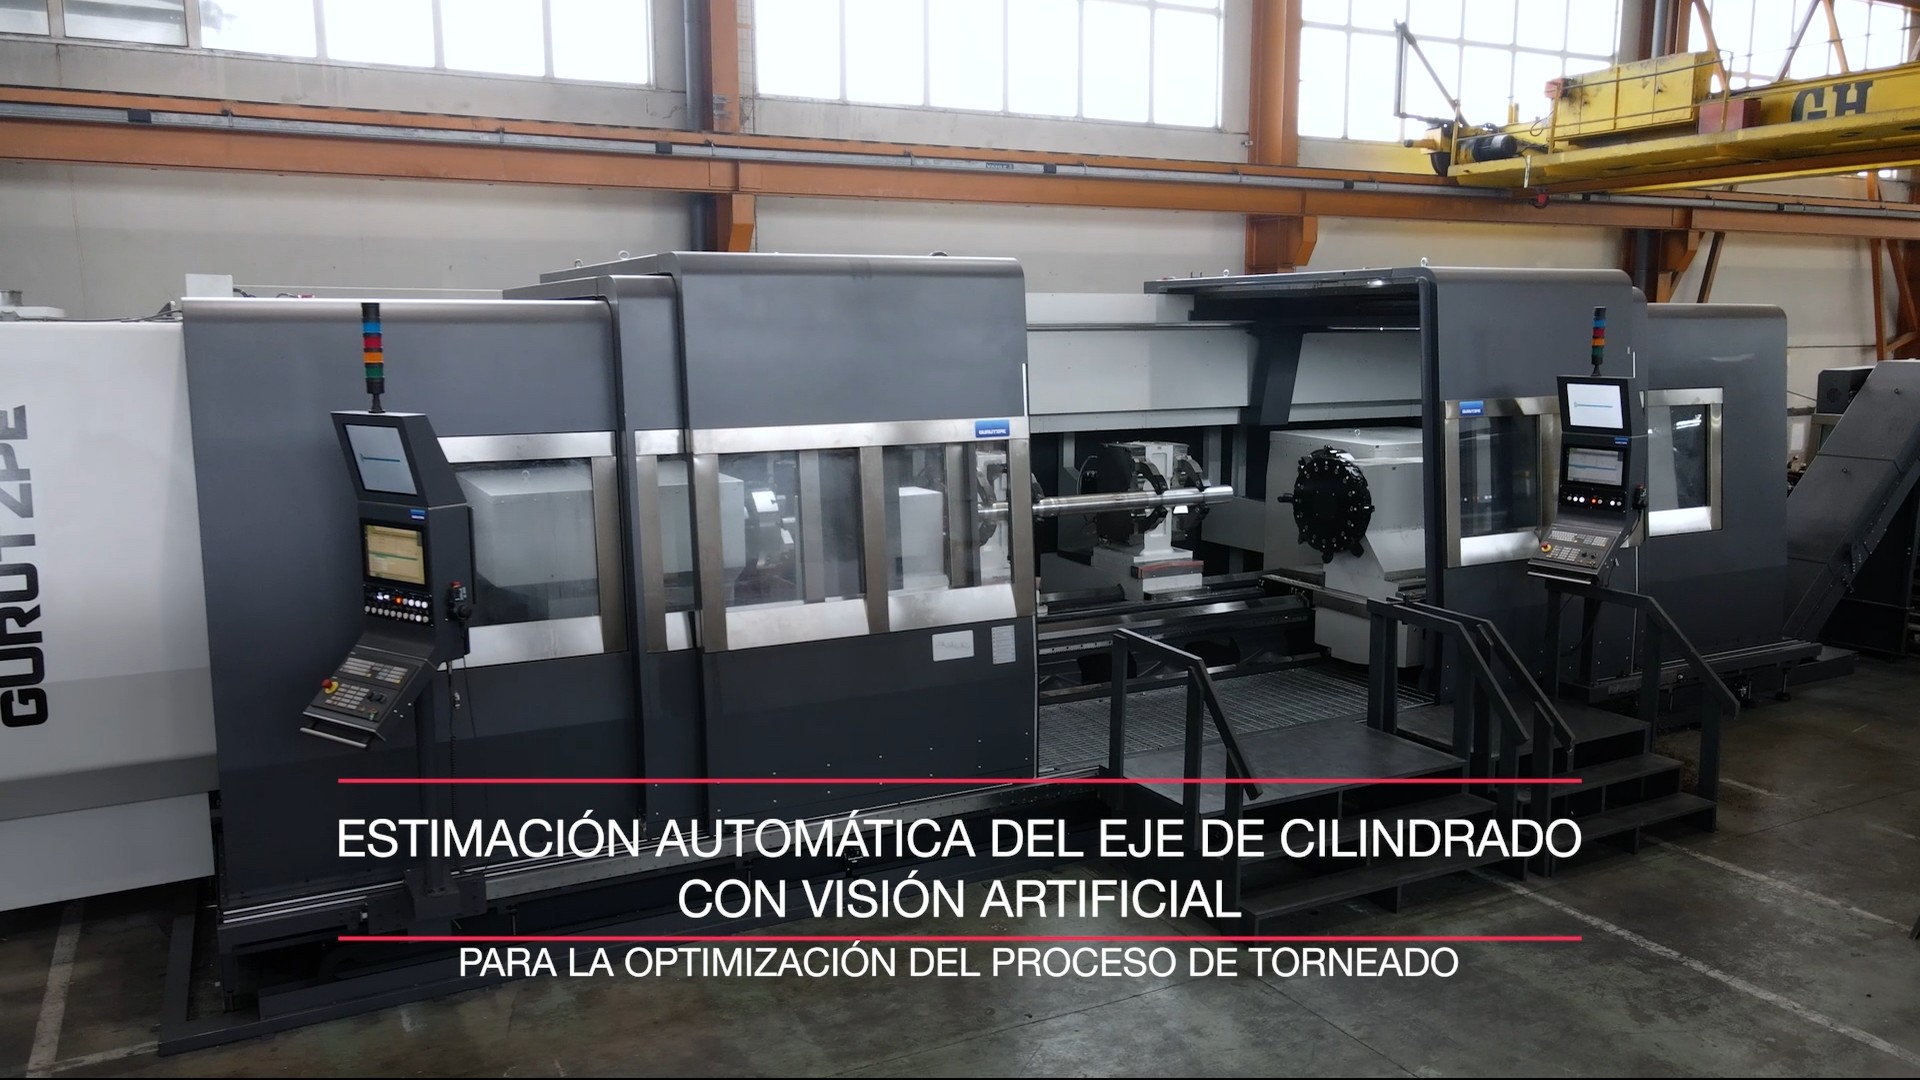 Digital twin of a turning machine and measuring system automation for efficient and sustainable production